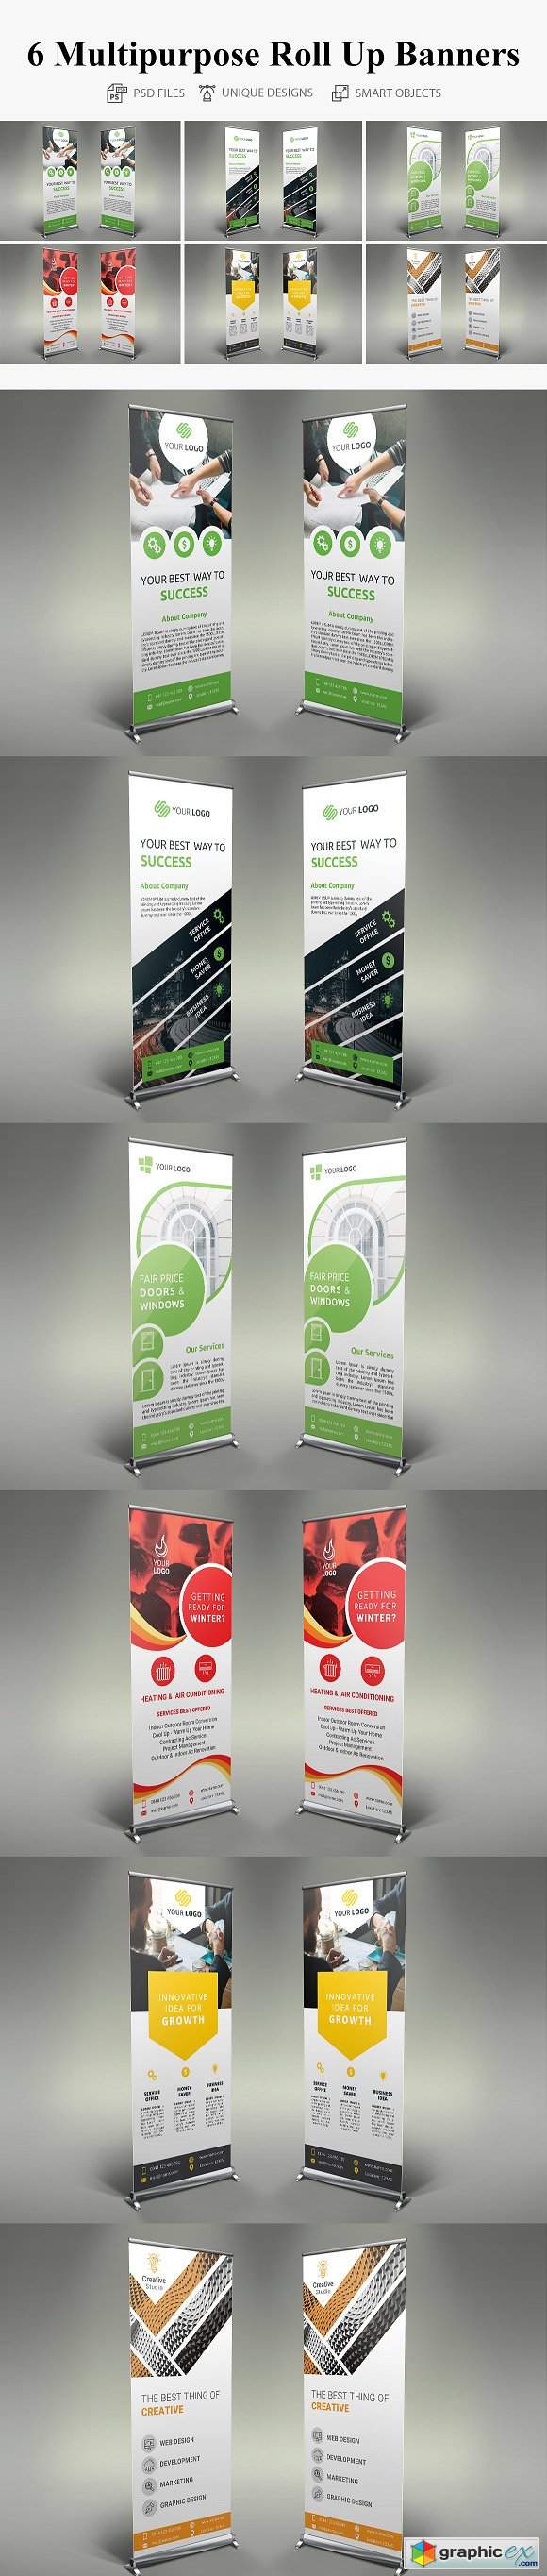 6 Multipurpose Roll Up Banners